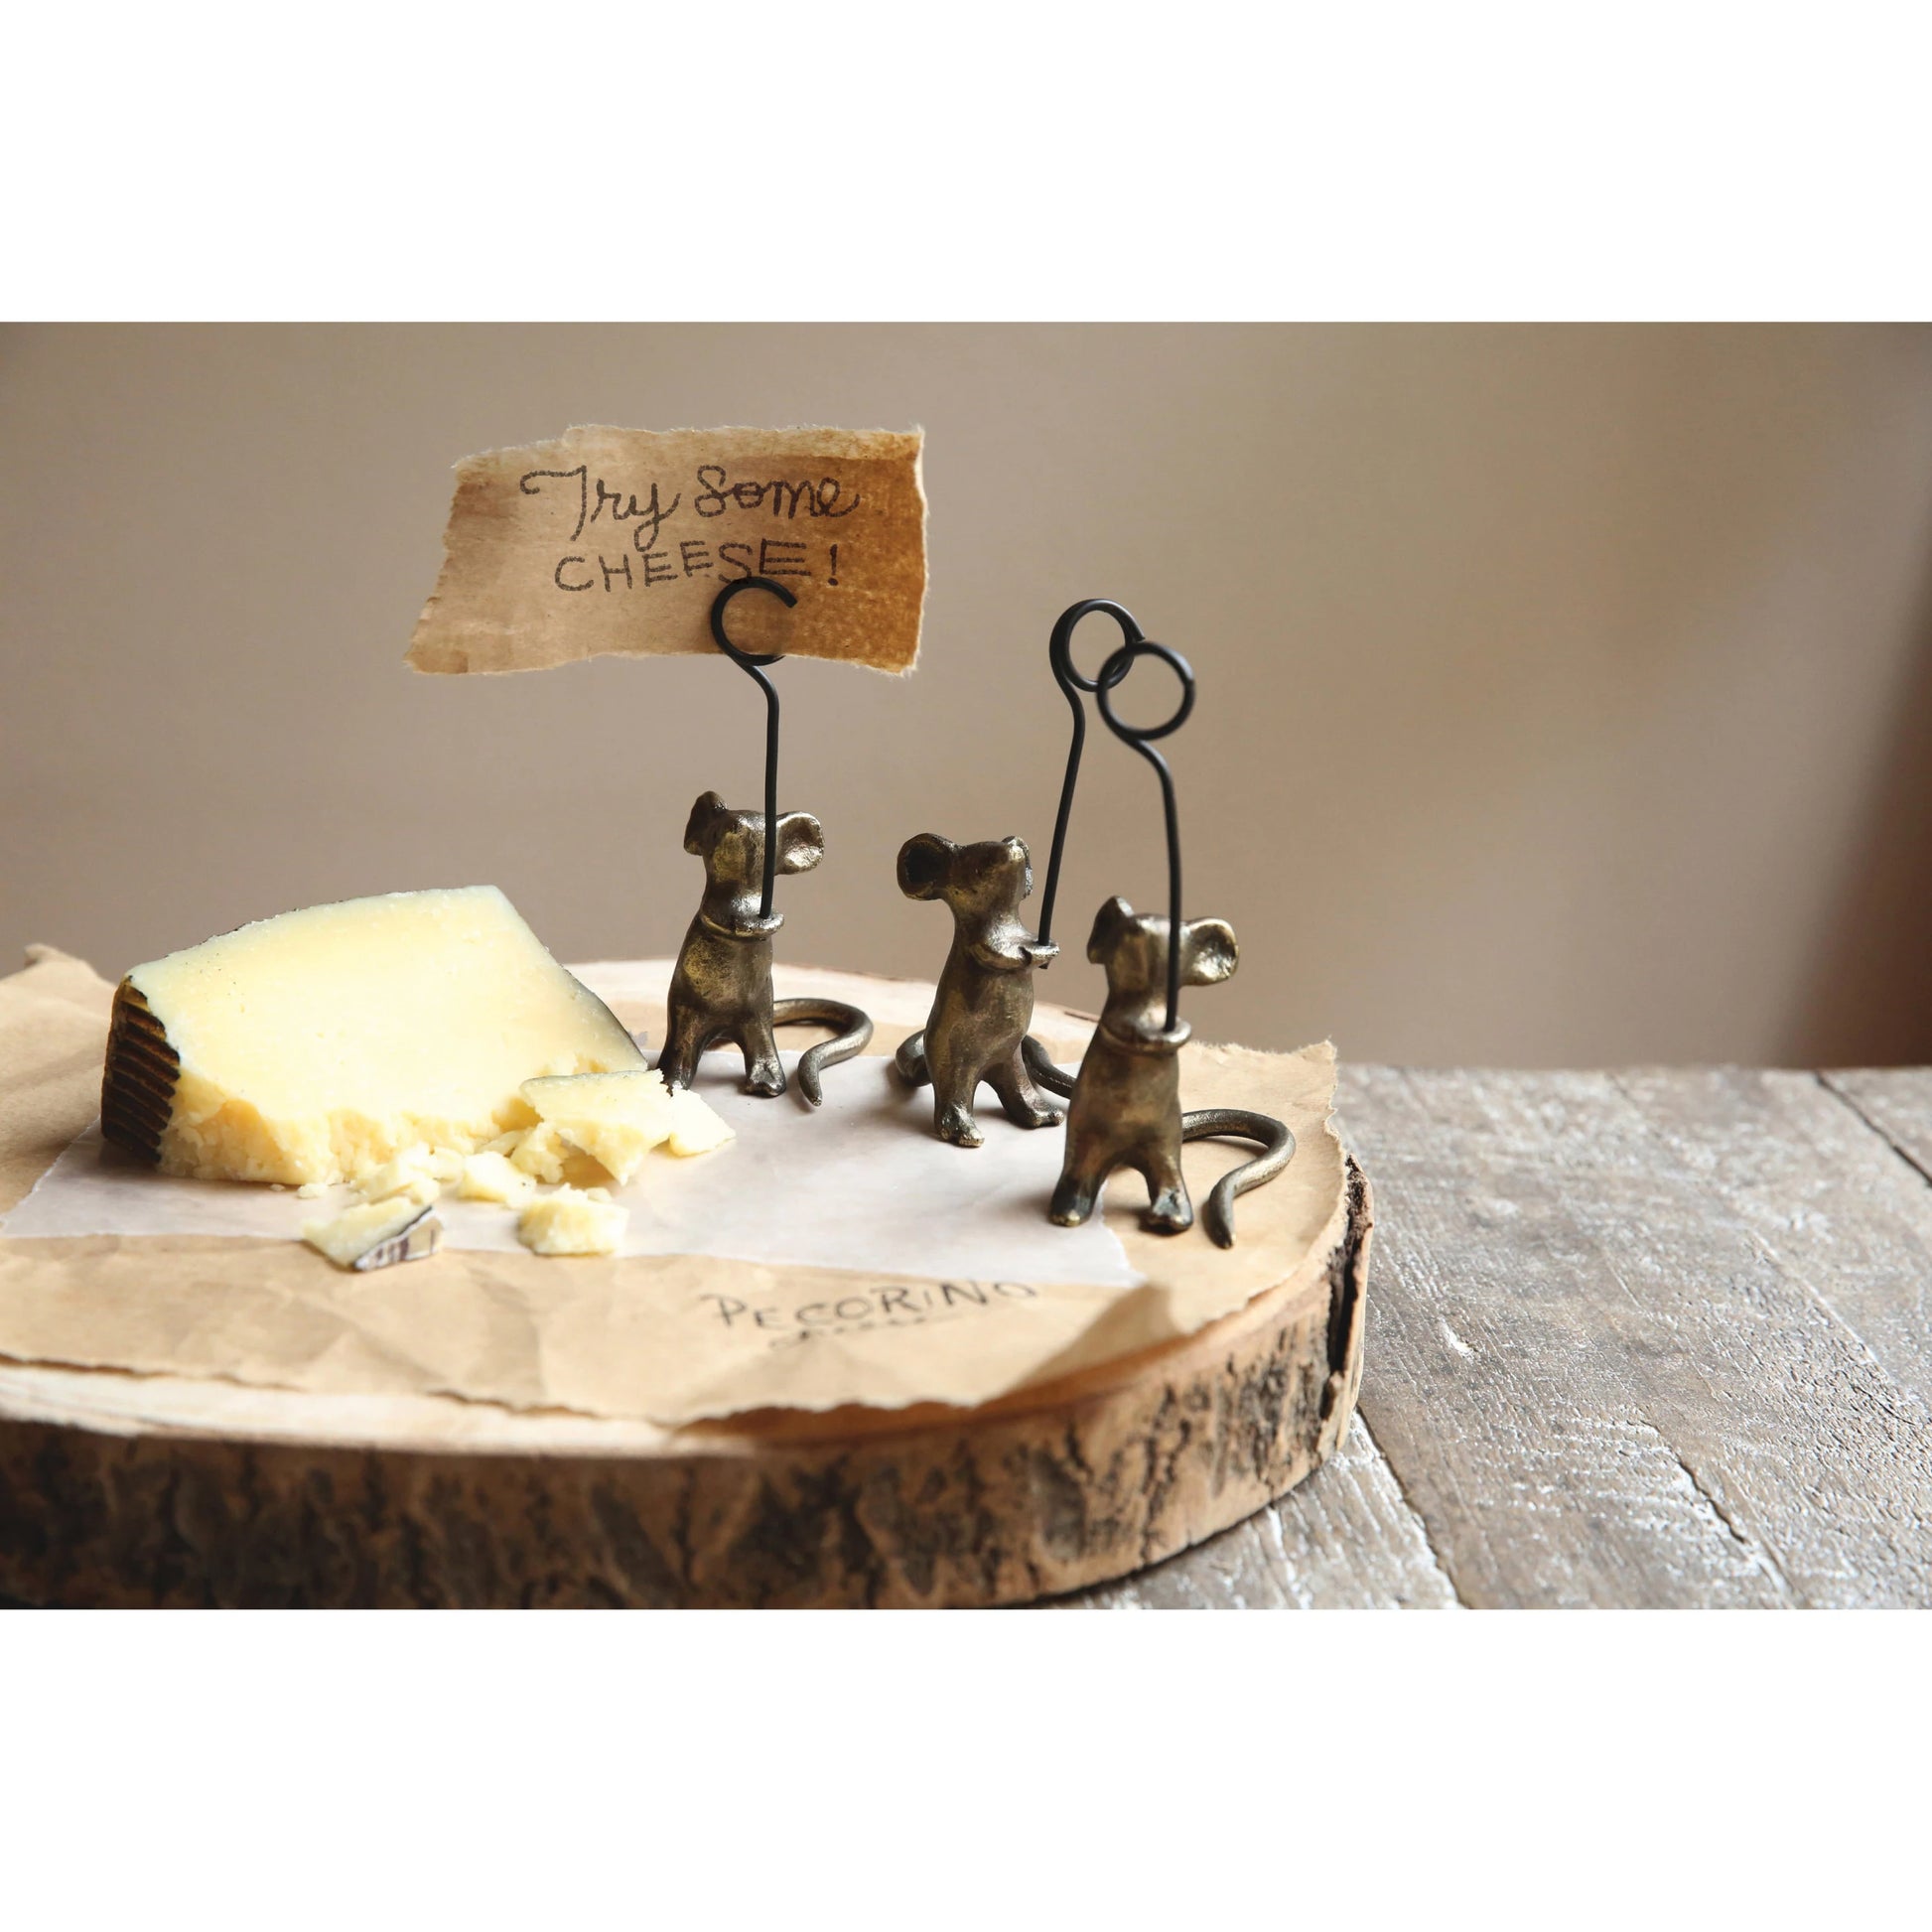 3 cast iron mice set on a wooden board with cheese, one mouse in holding a card that reads "try some cheese".